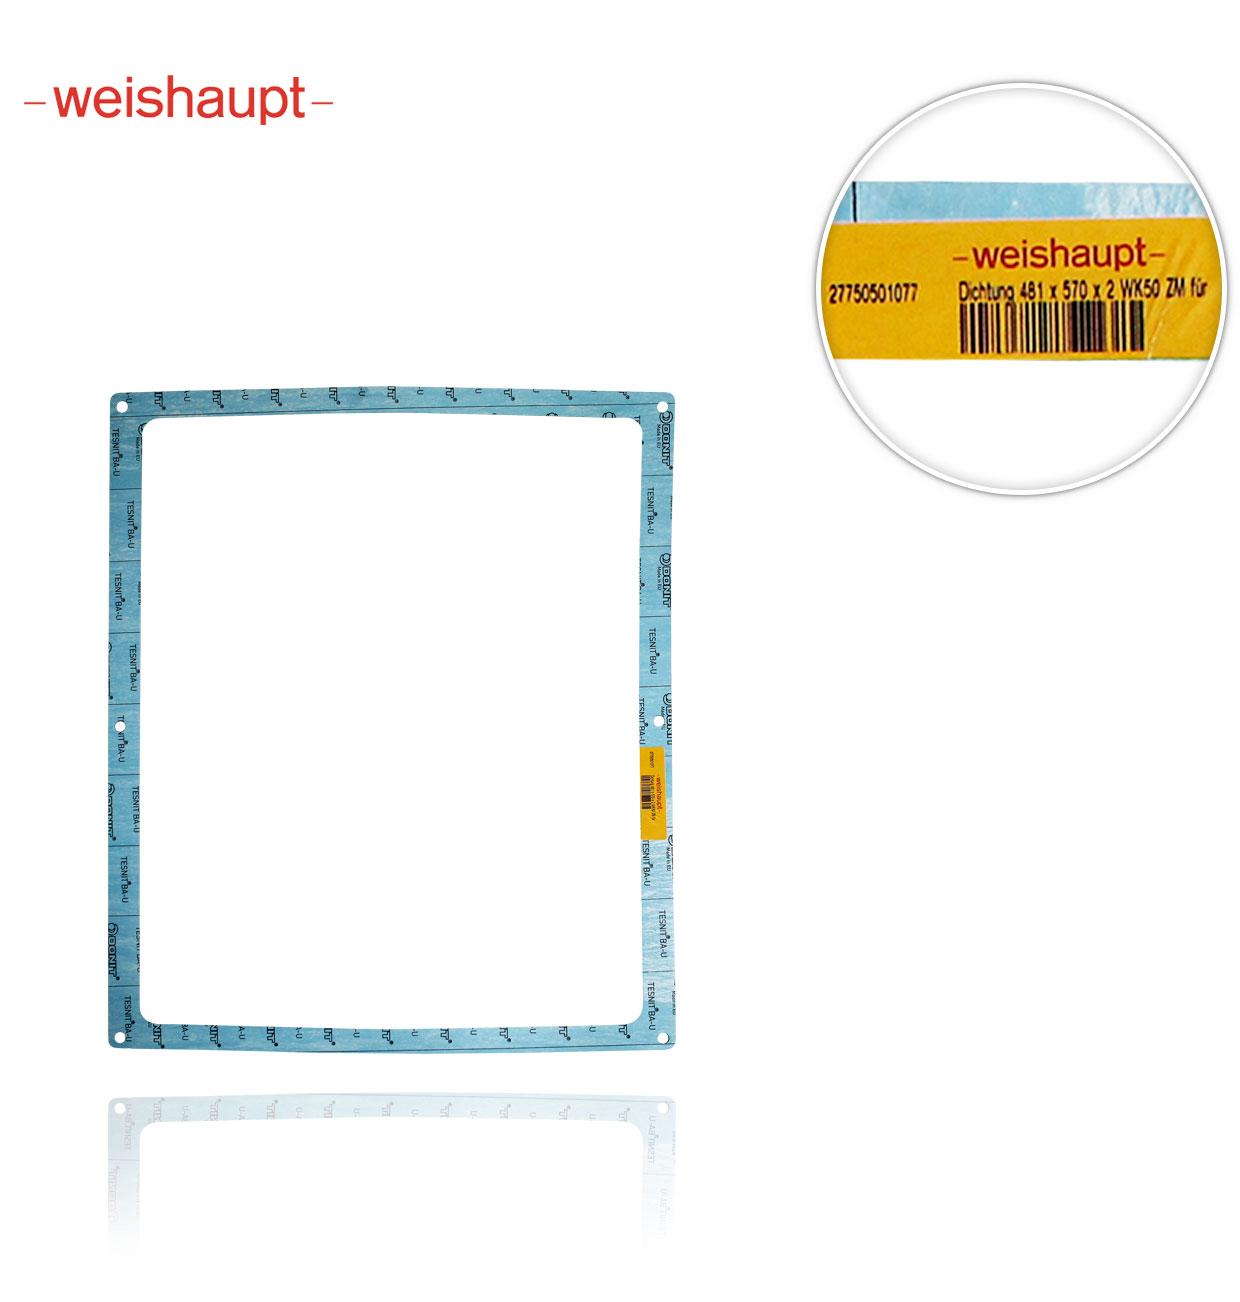 8x540x392 GASKET for WEISHAUPT  27750501197 WK50